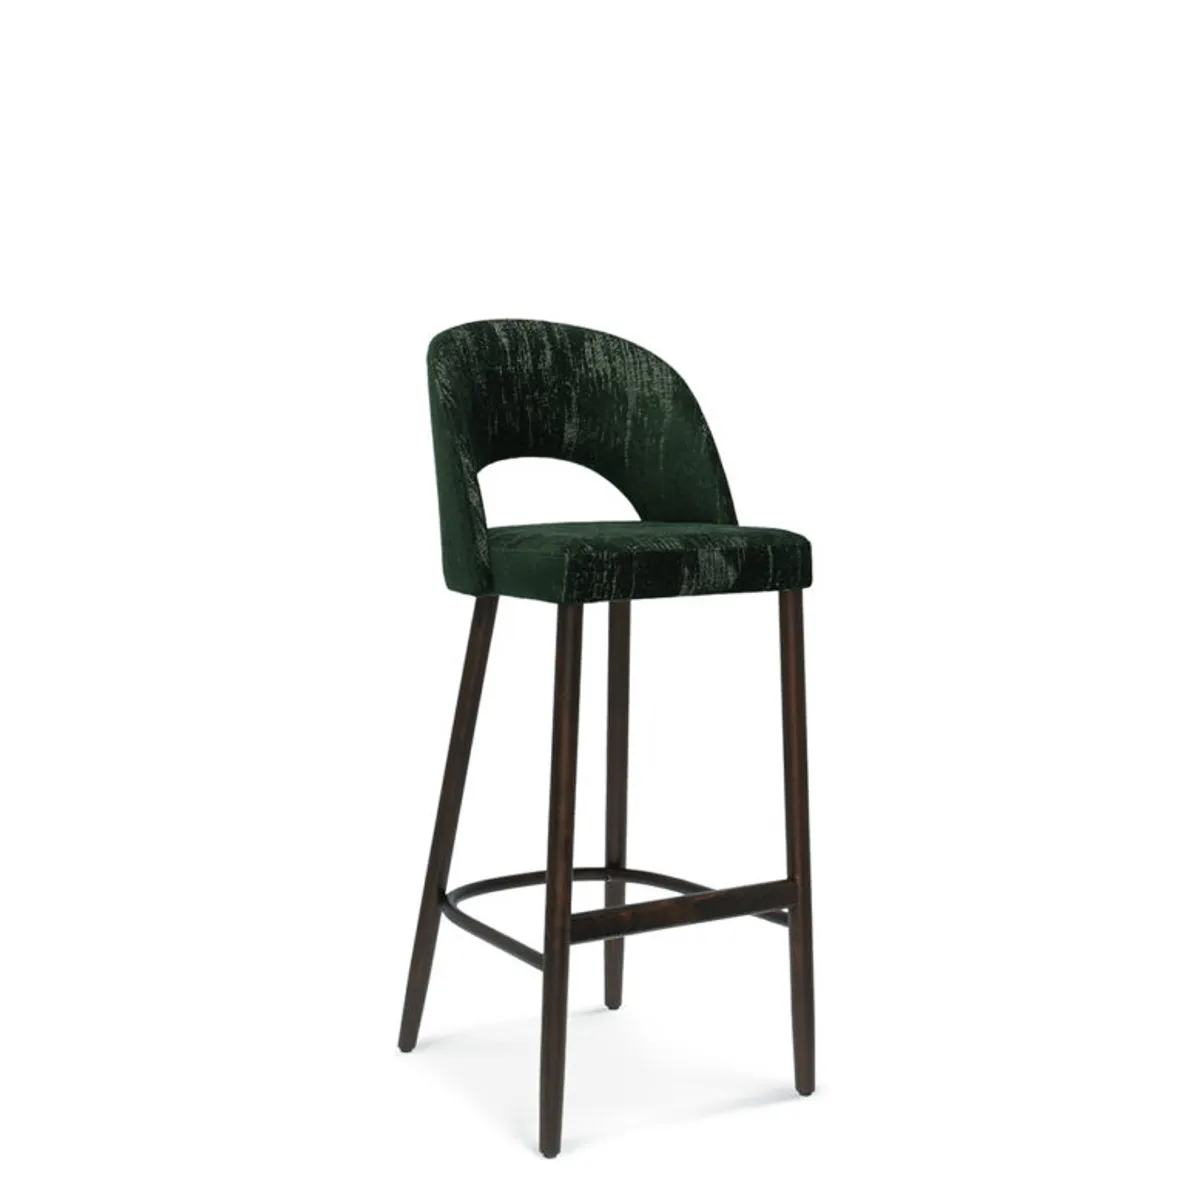 Curve Soft Barstool Bst 1412 4 Inside Out Contracts